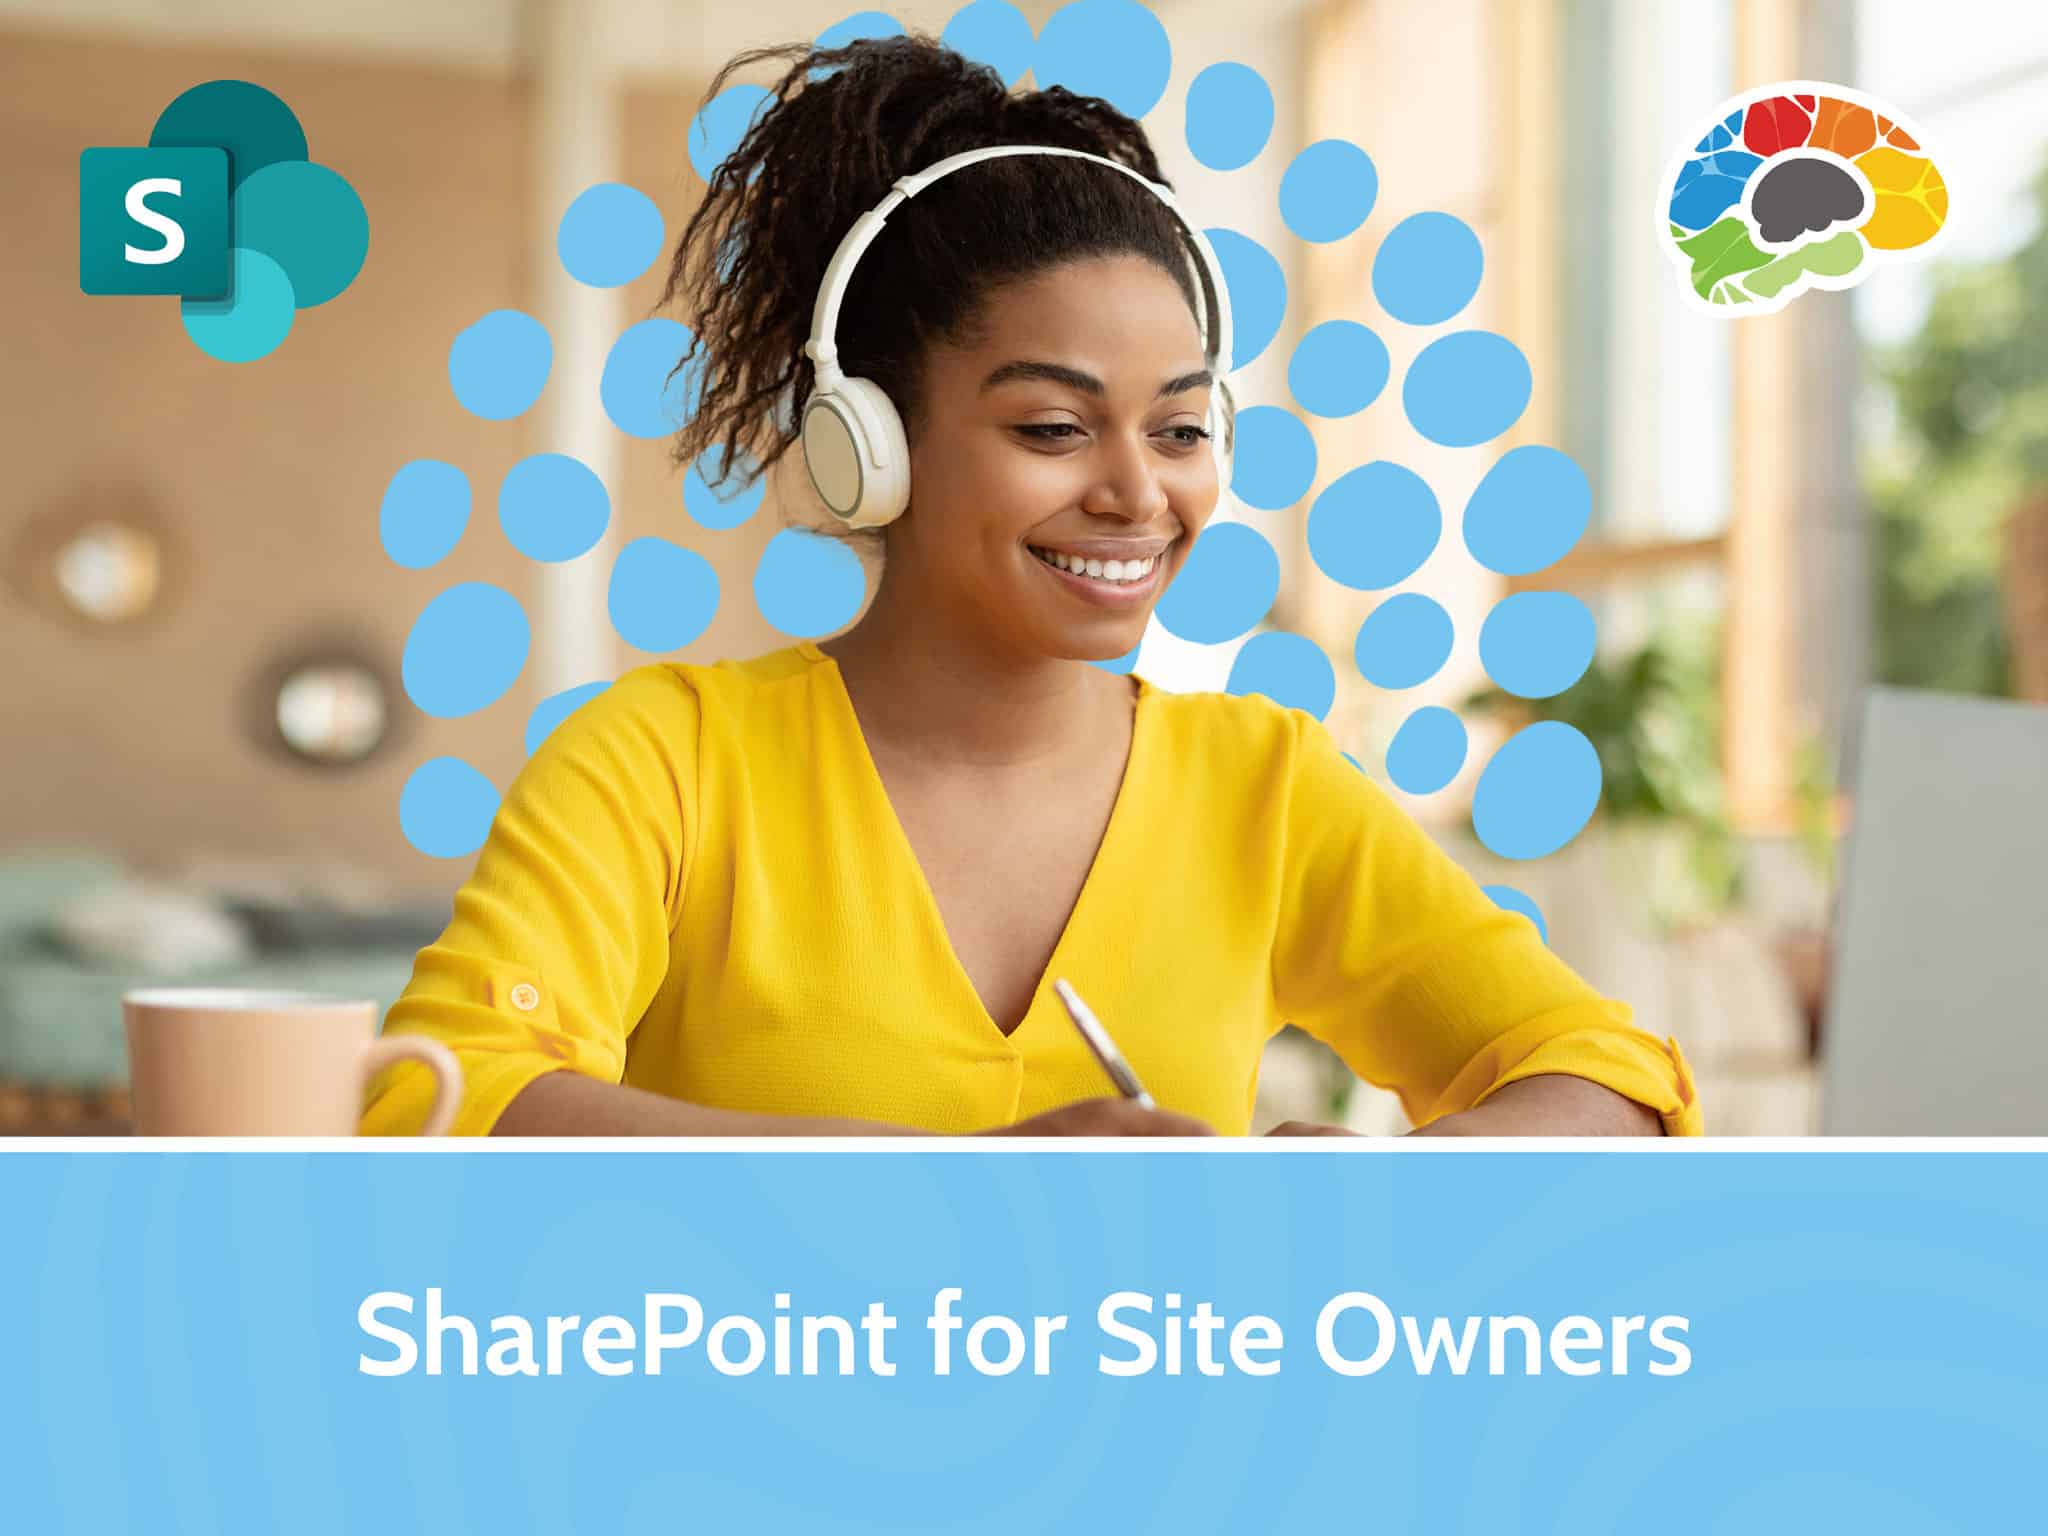 SharePoint for Site Owners scaled